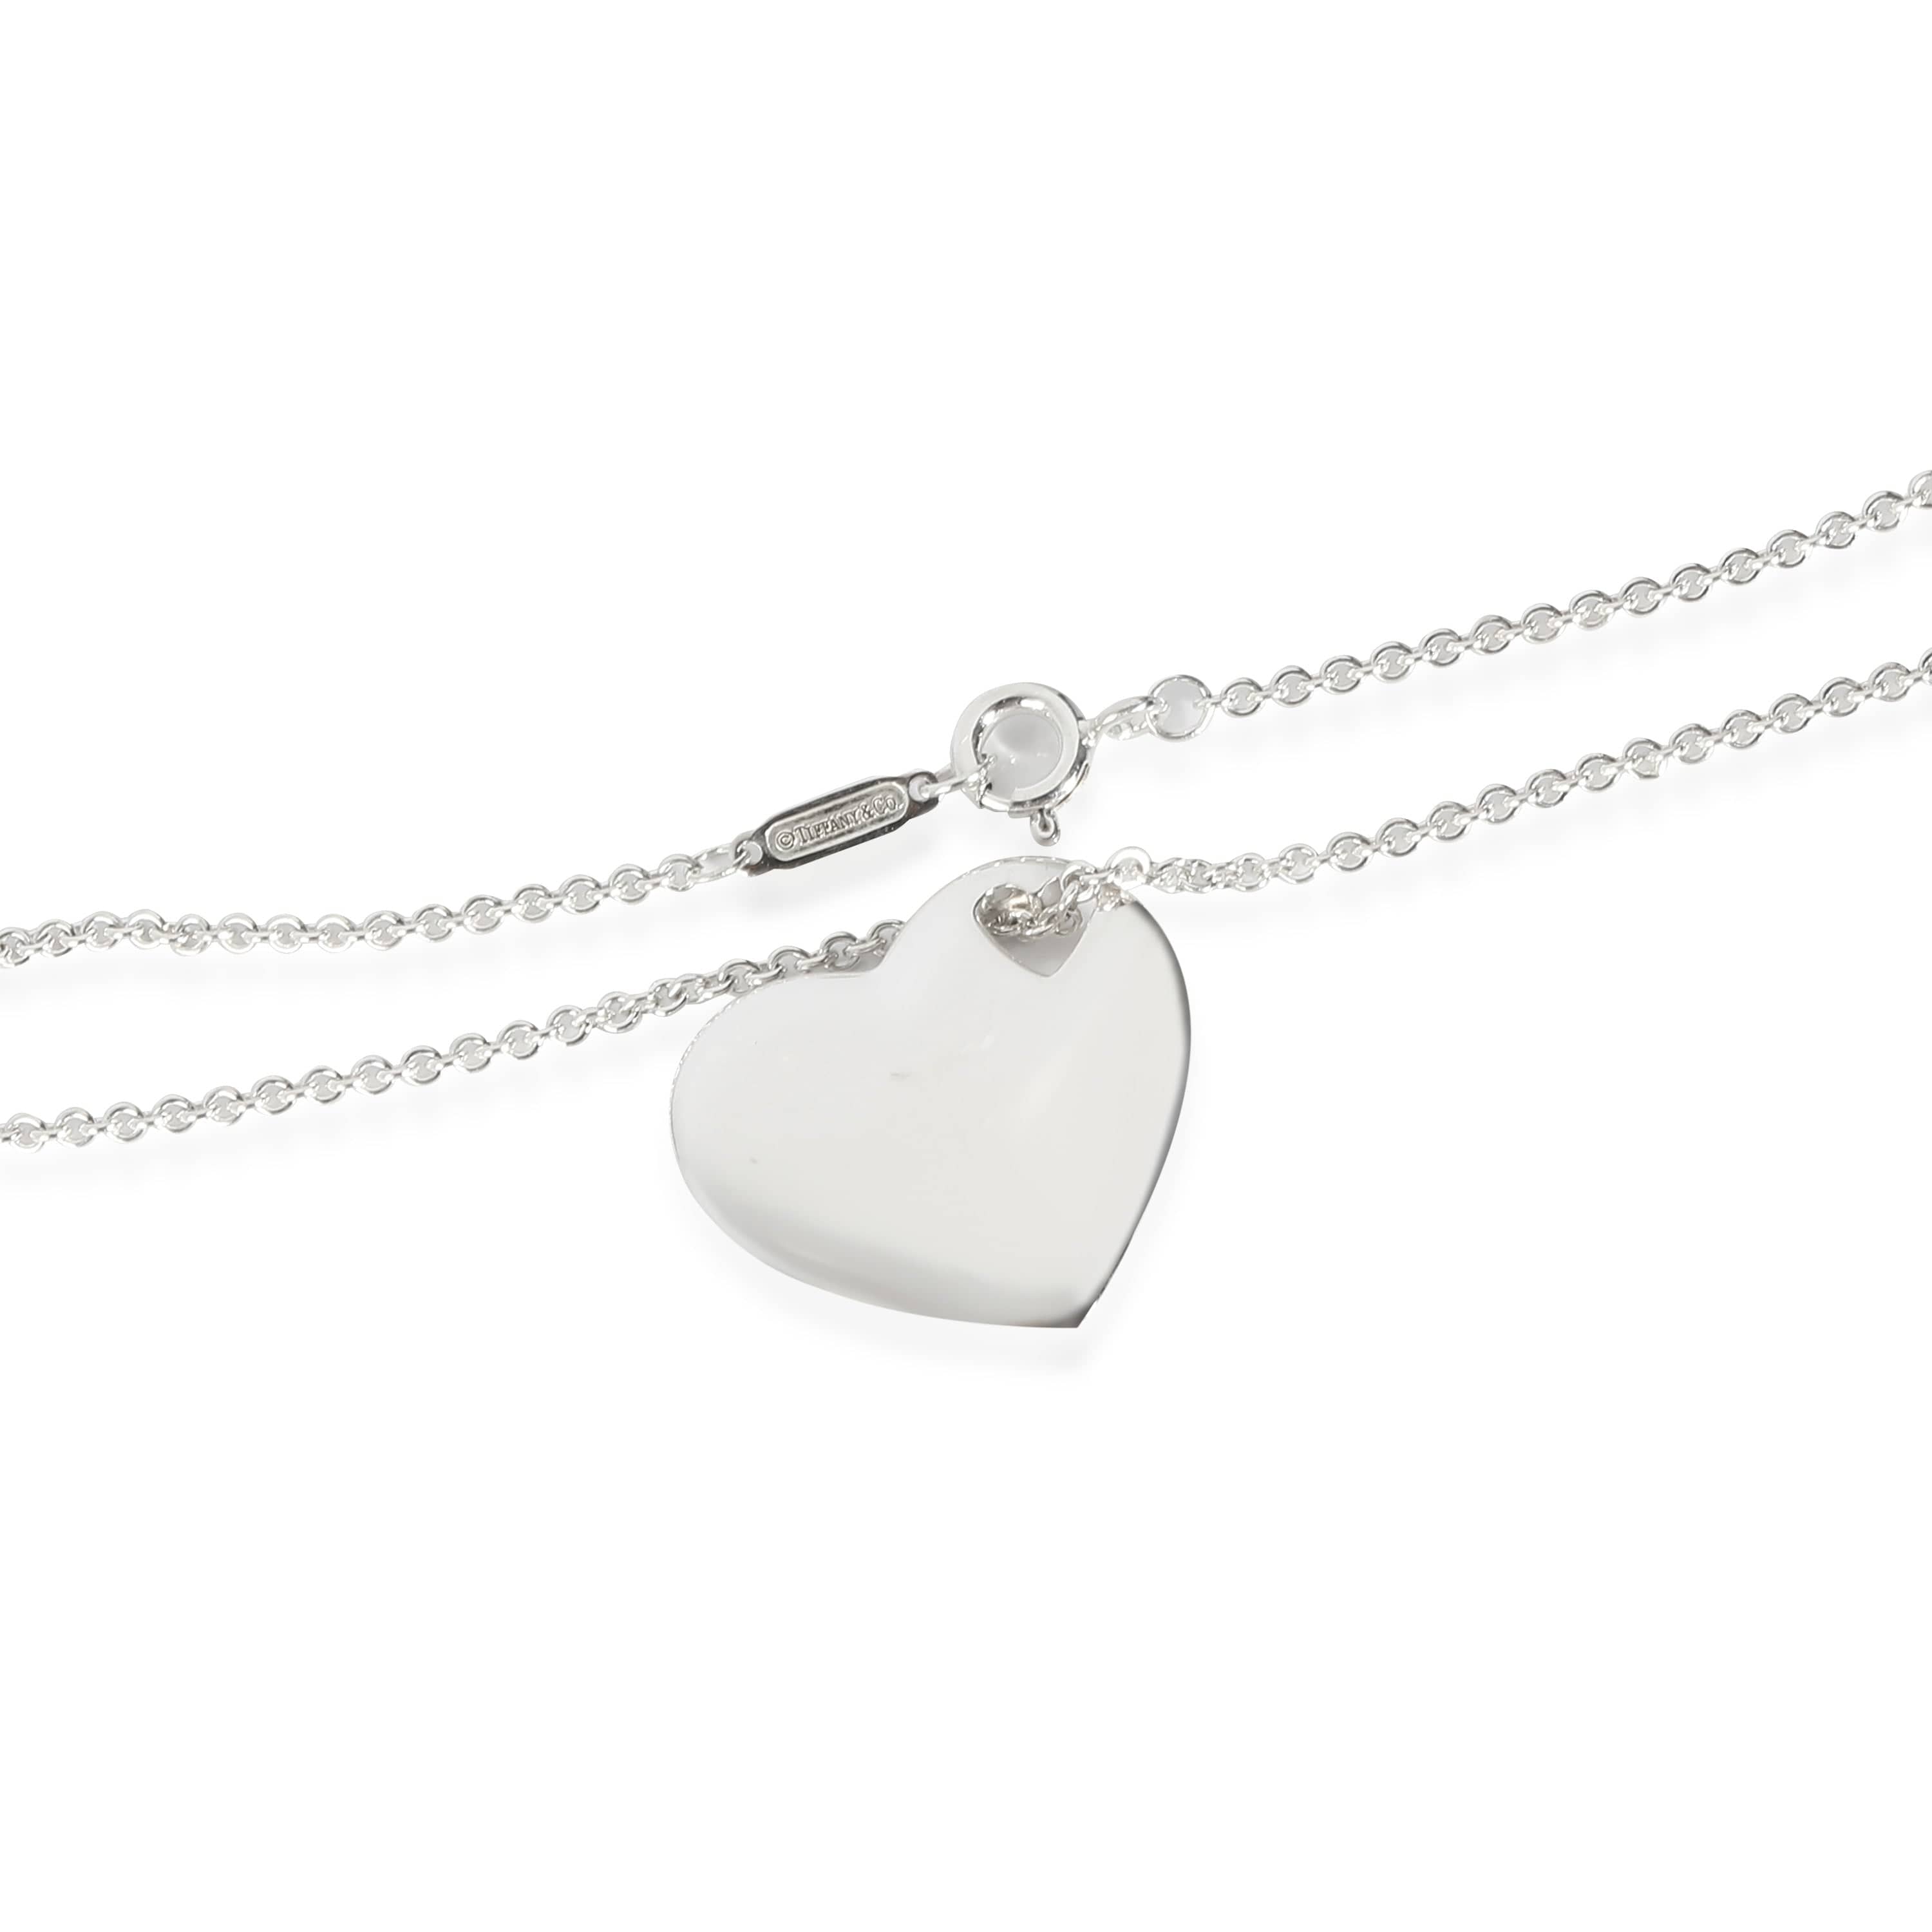 Tiffany & Co. Heart Cut Out Pendant in Sterling Silver